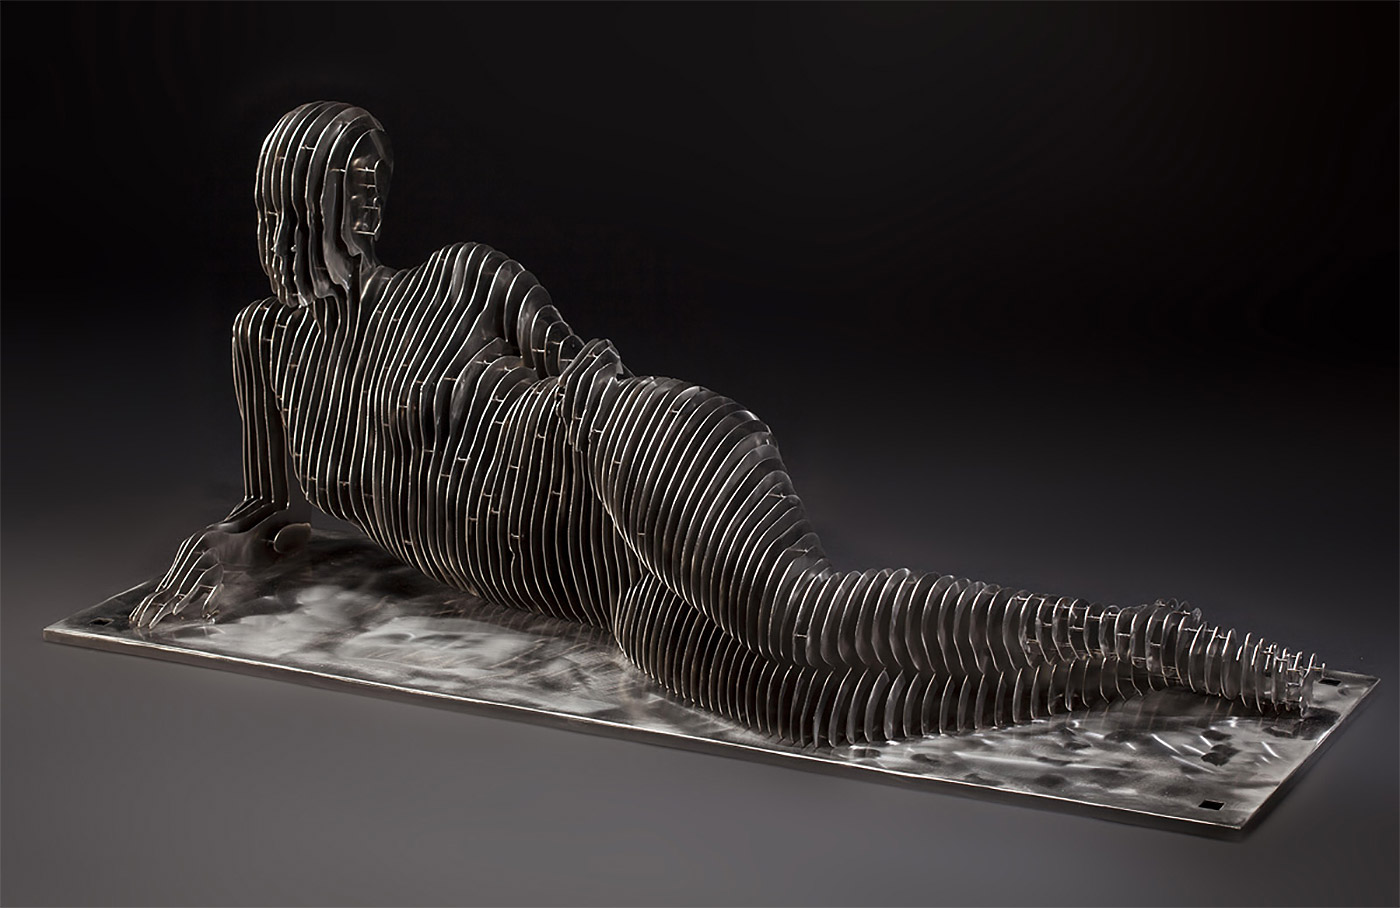 Disappearing Sculptures by Julian Voss-Andreae | Daily design